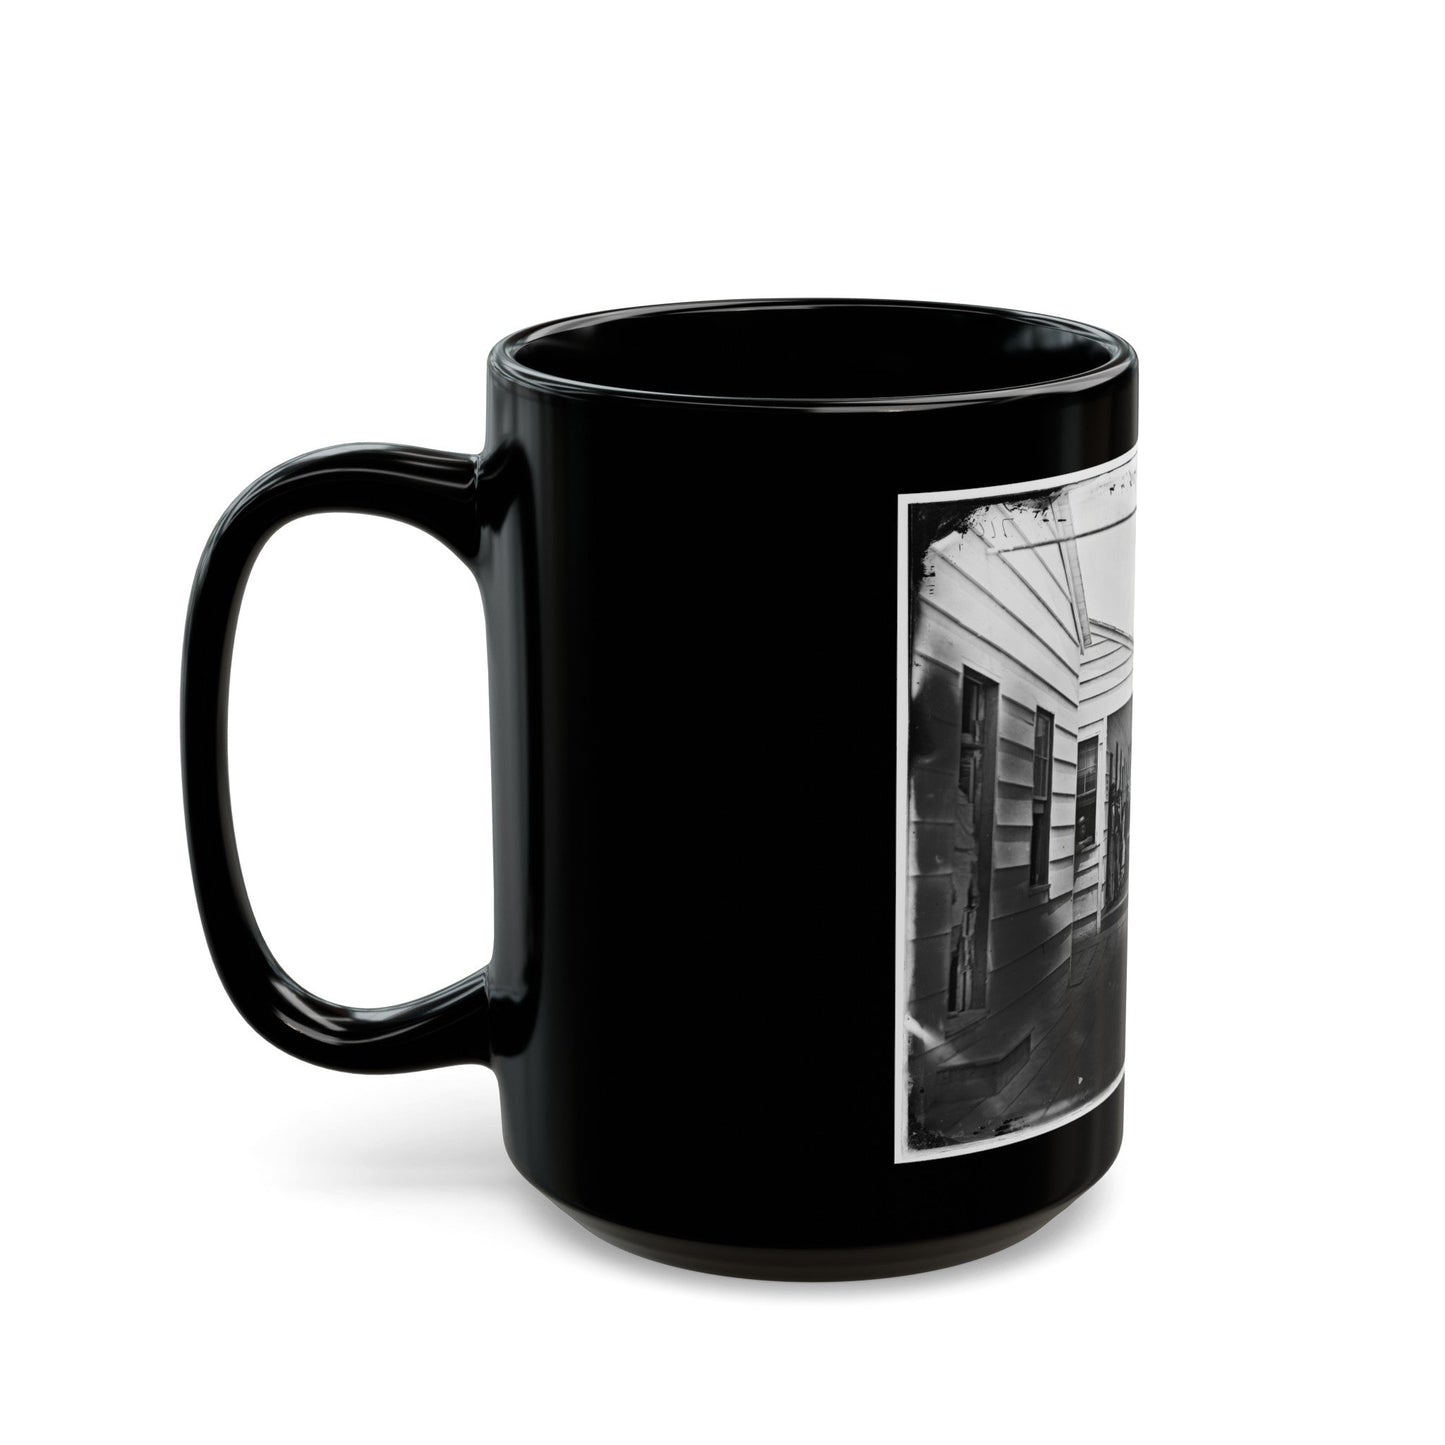 Washington, D.C. Convalescent Soldiers And Others Outside Quarters Of The Sanitary Commission Home Lodge (U.S. Civil War) Black Coffee Mug